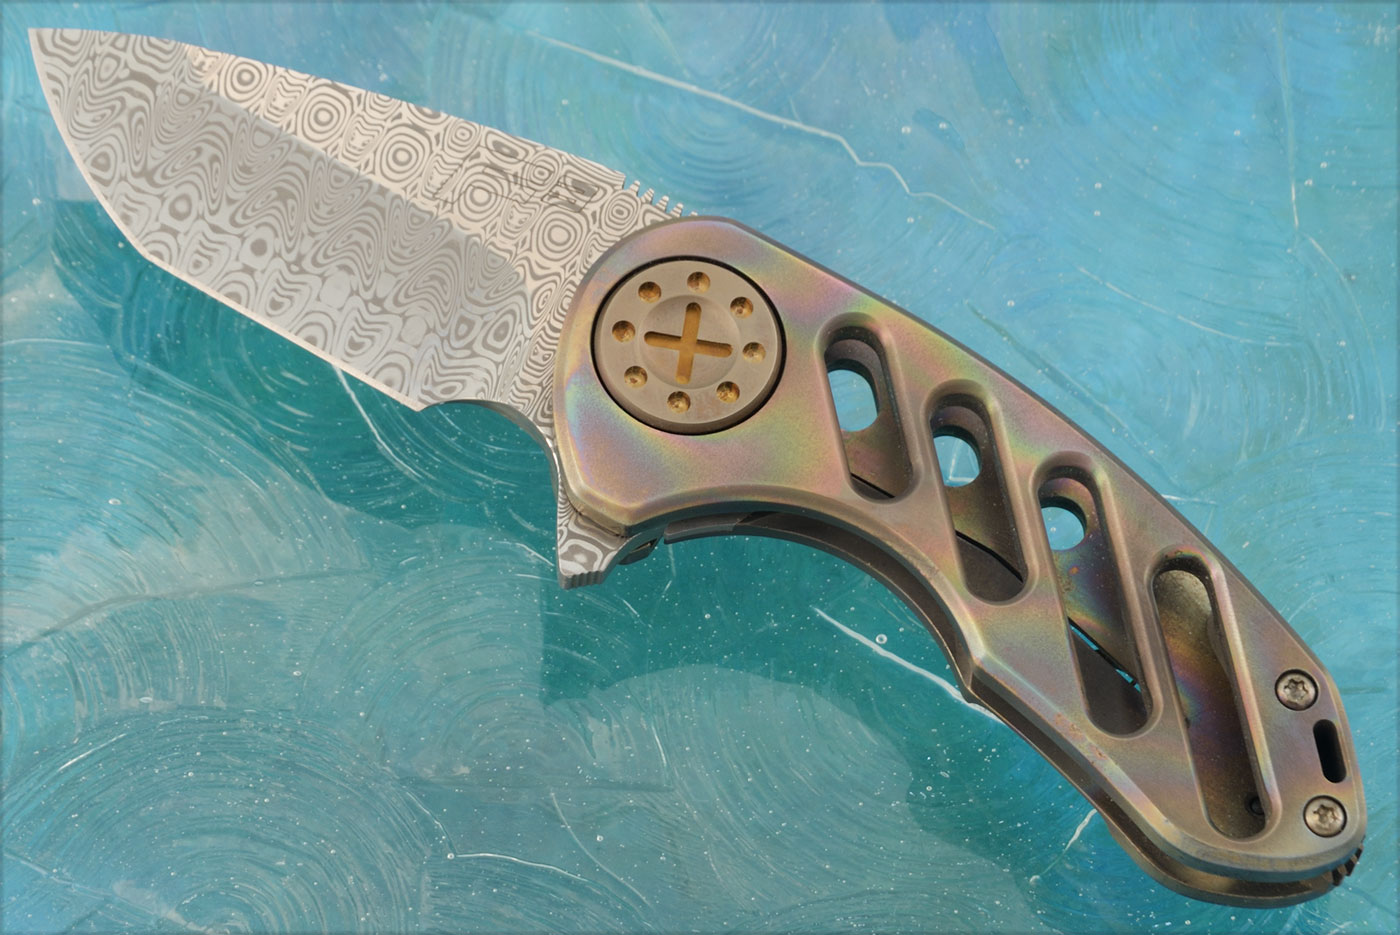 F3 Compact Flipper with Damasteel and Flame Anodized Titanium